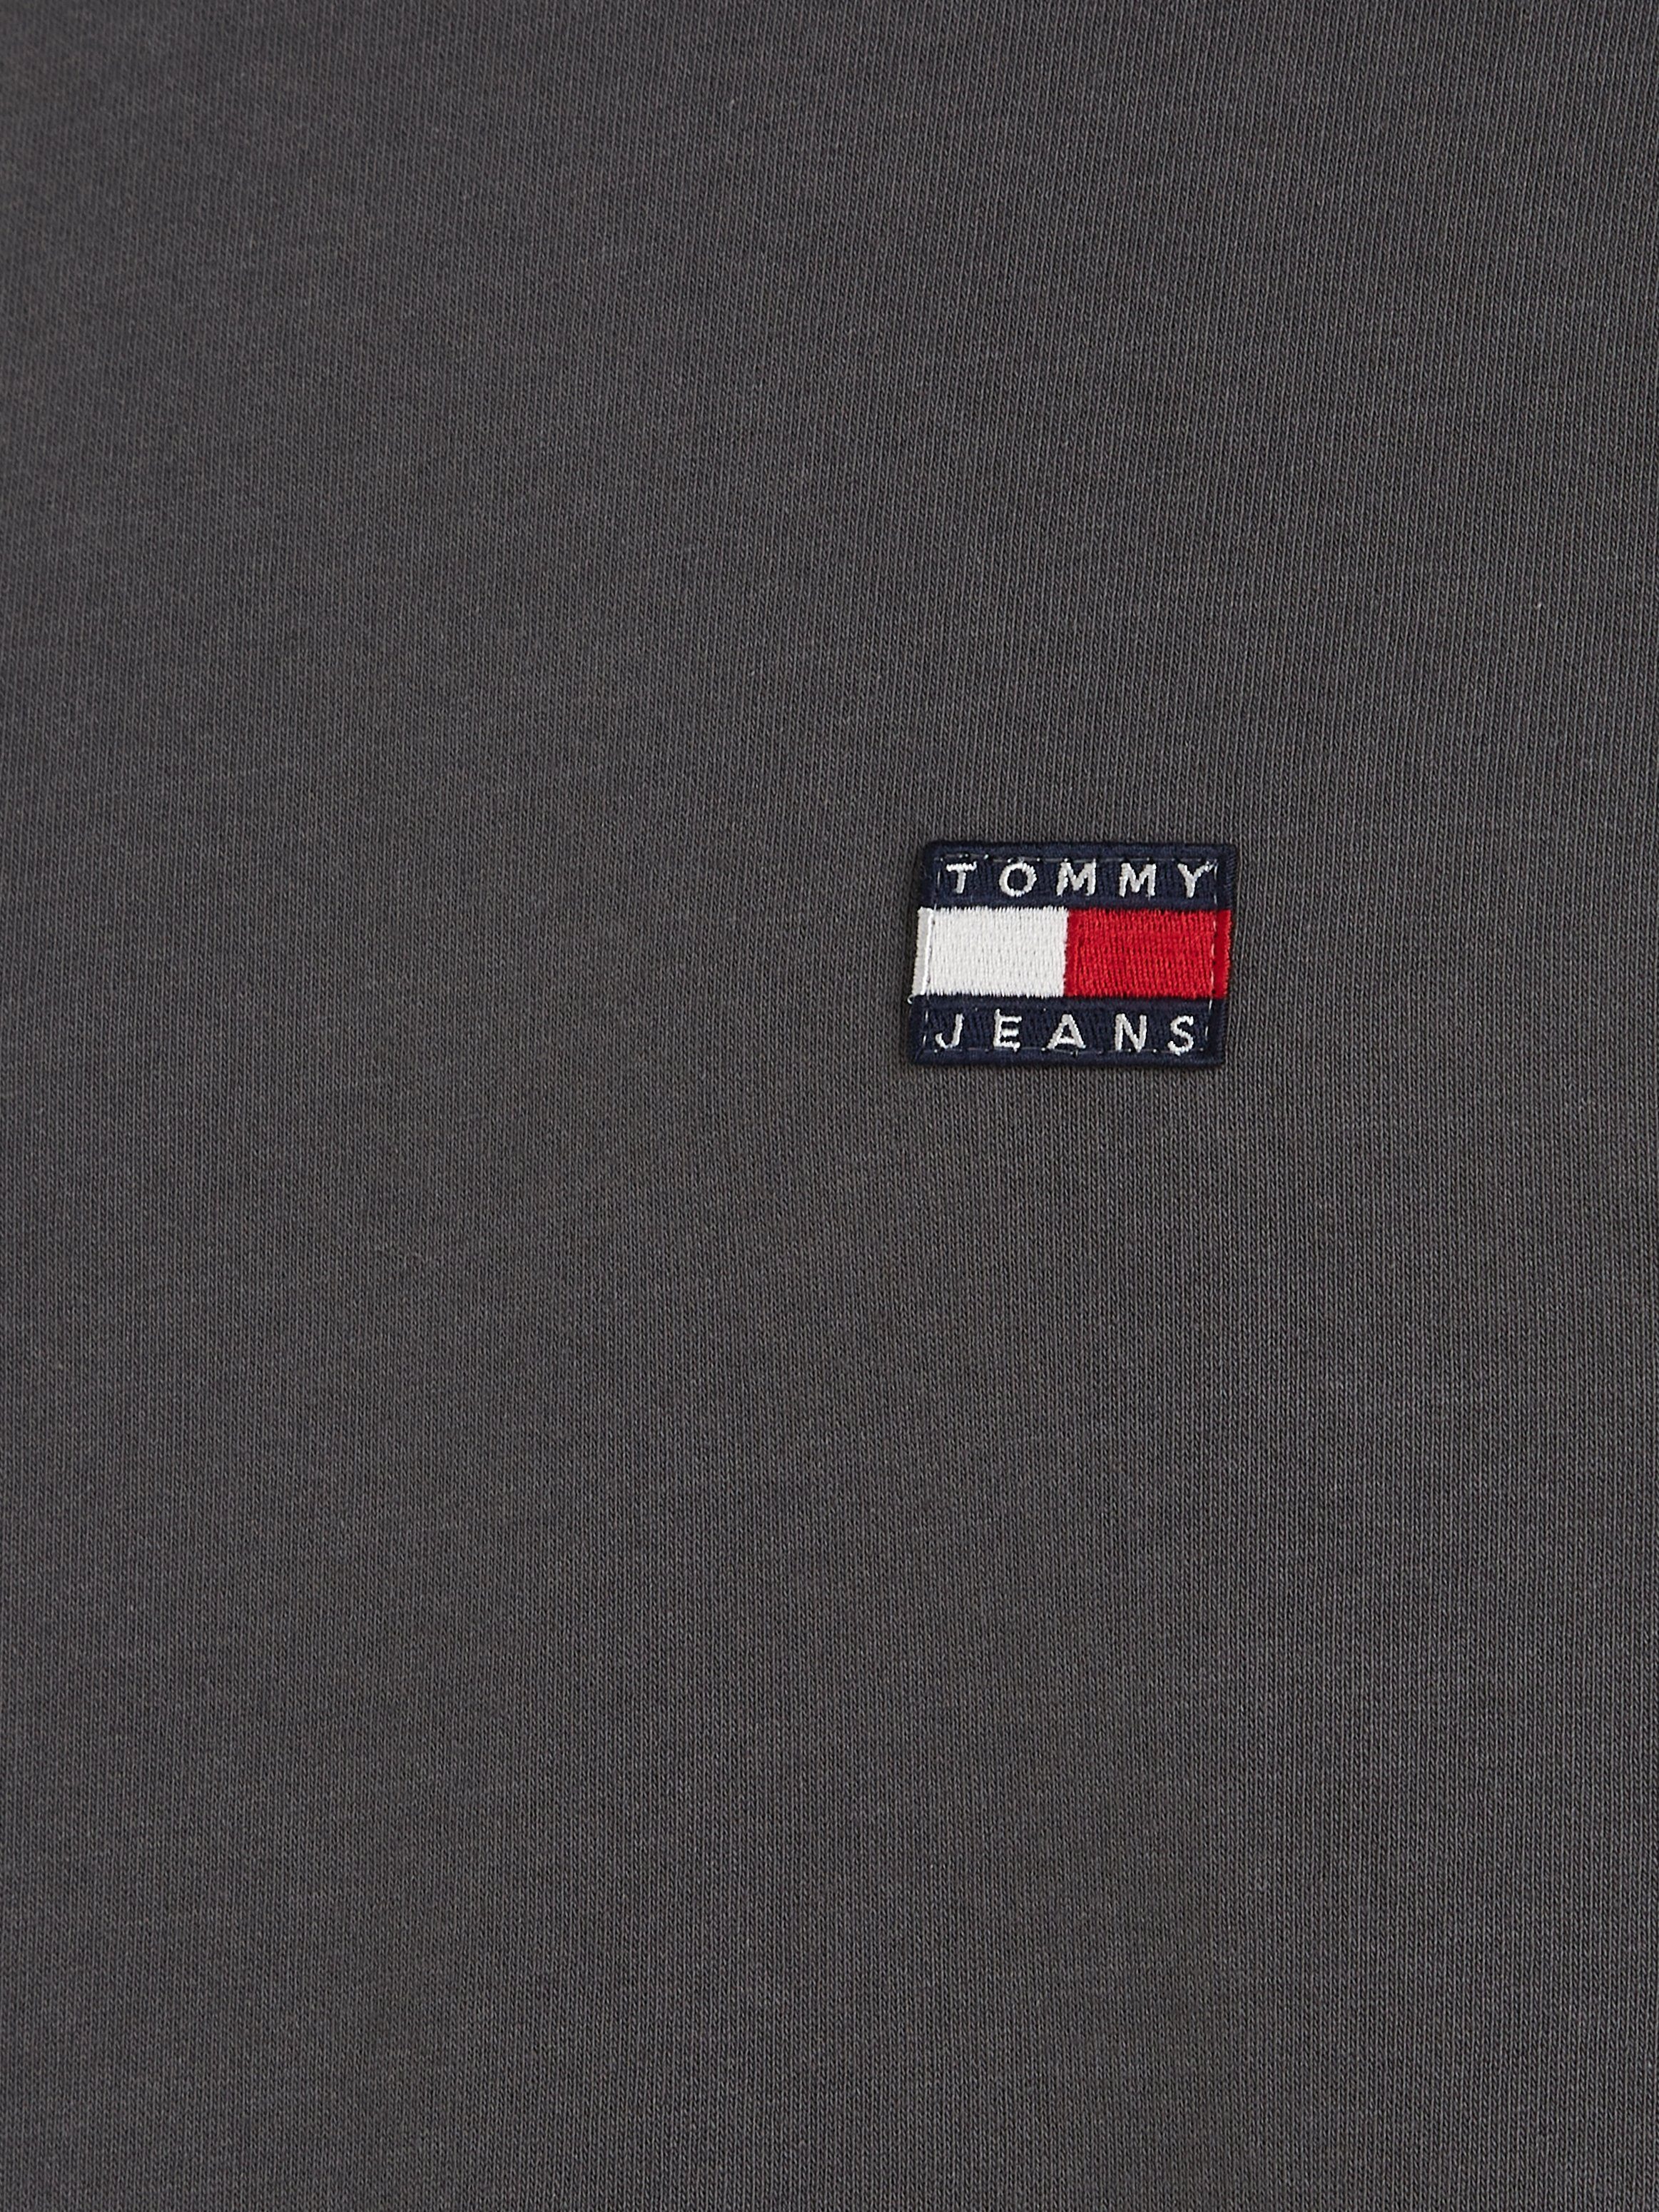 TEE New XS Jeans T-Shirt CLSC Tommy Charcoal TOMMY BADGE TJM